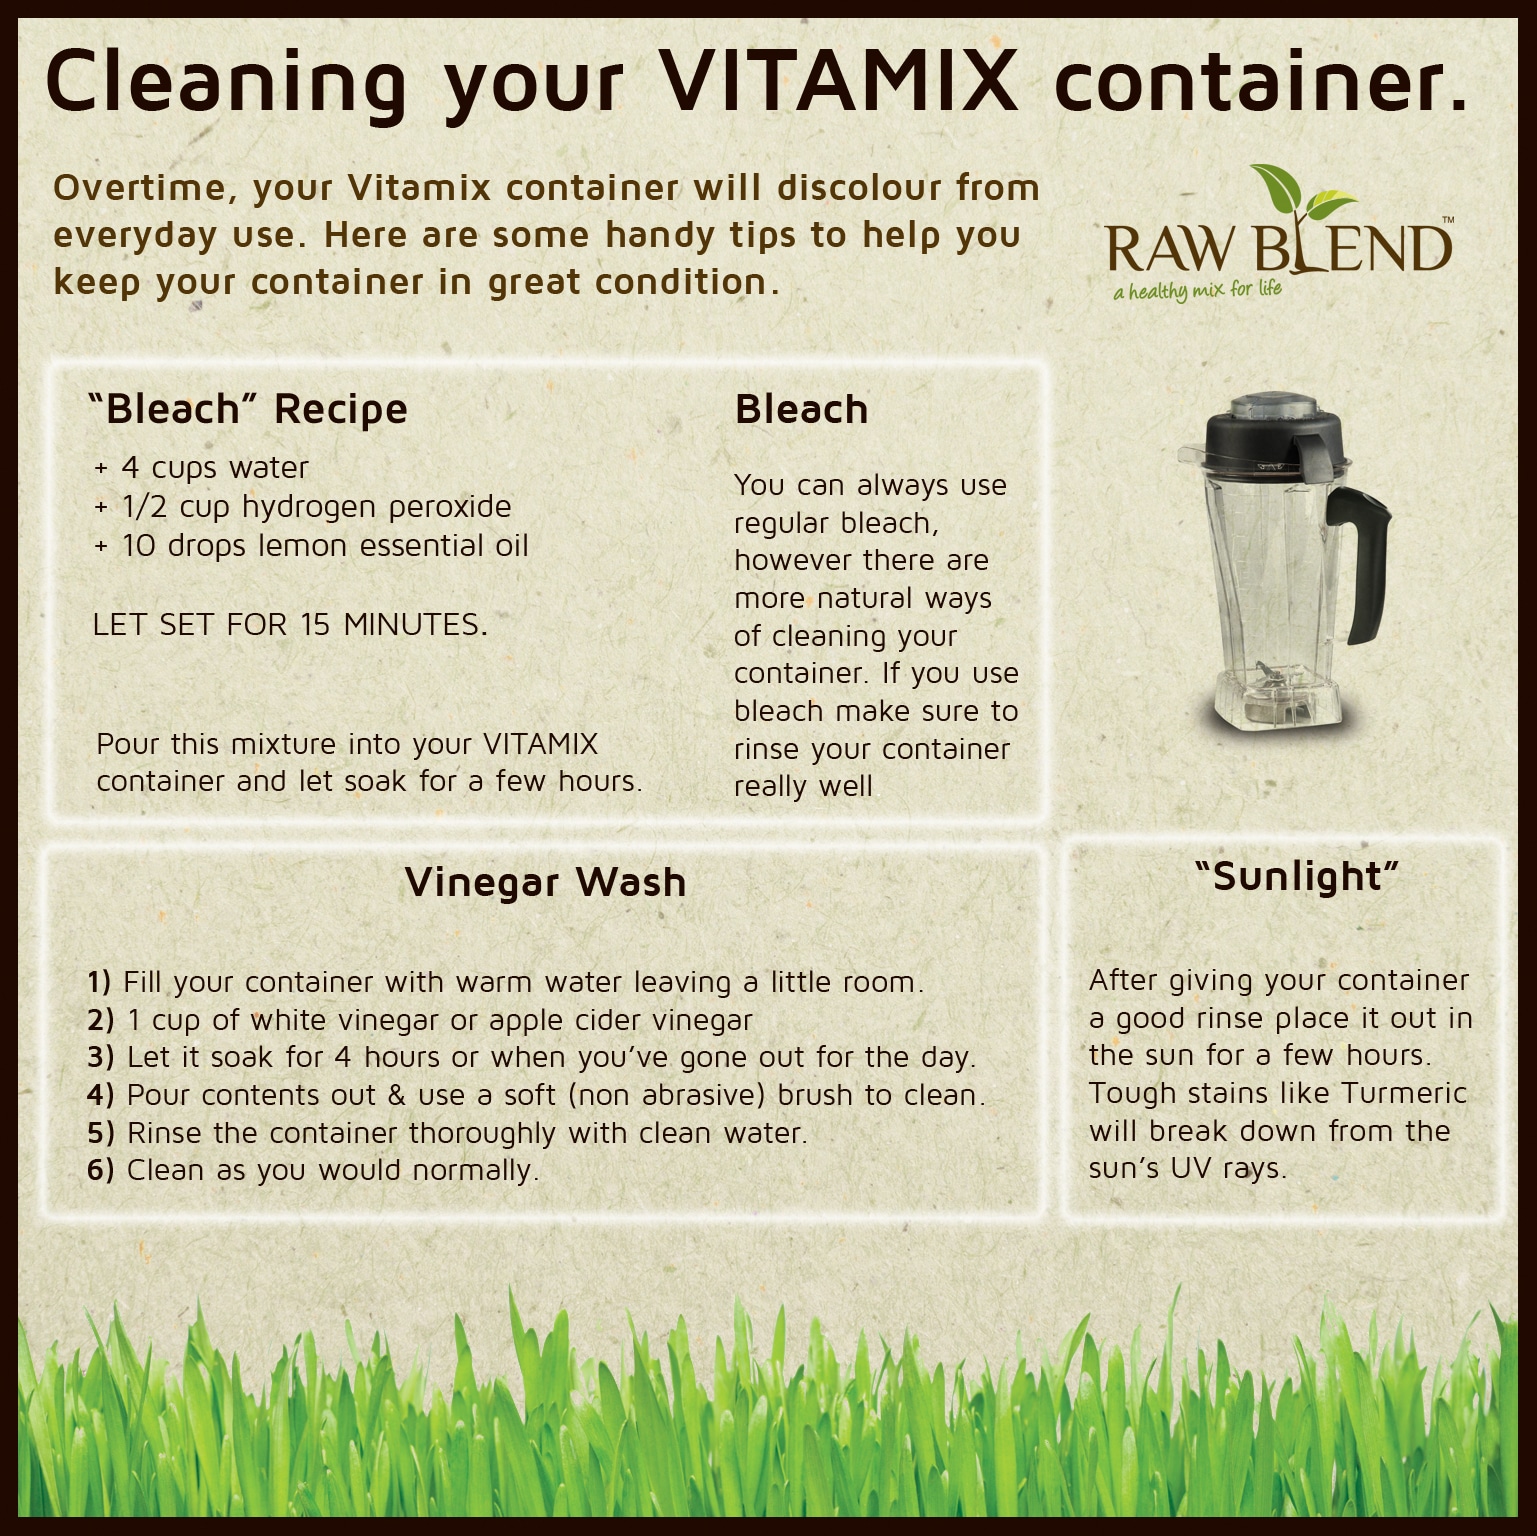 How to clean your Vitamix Container